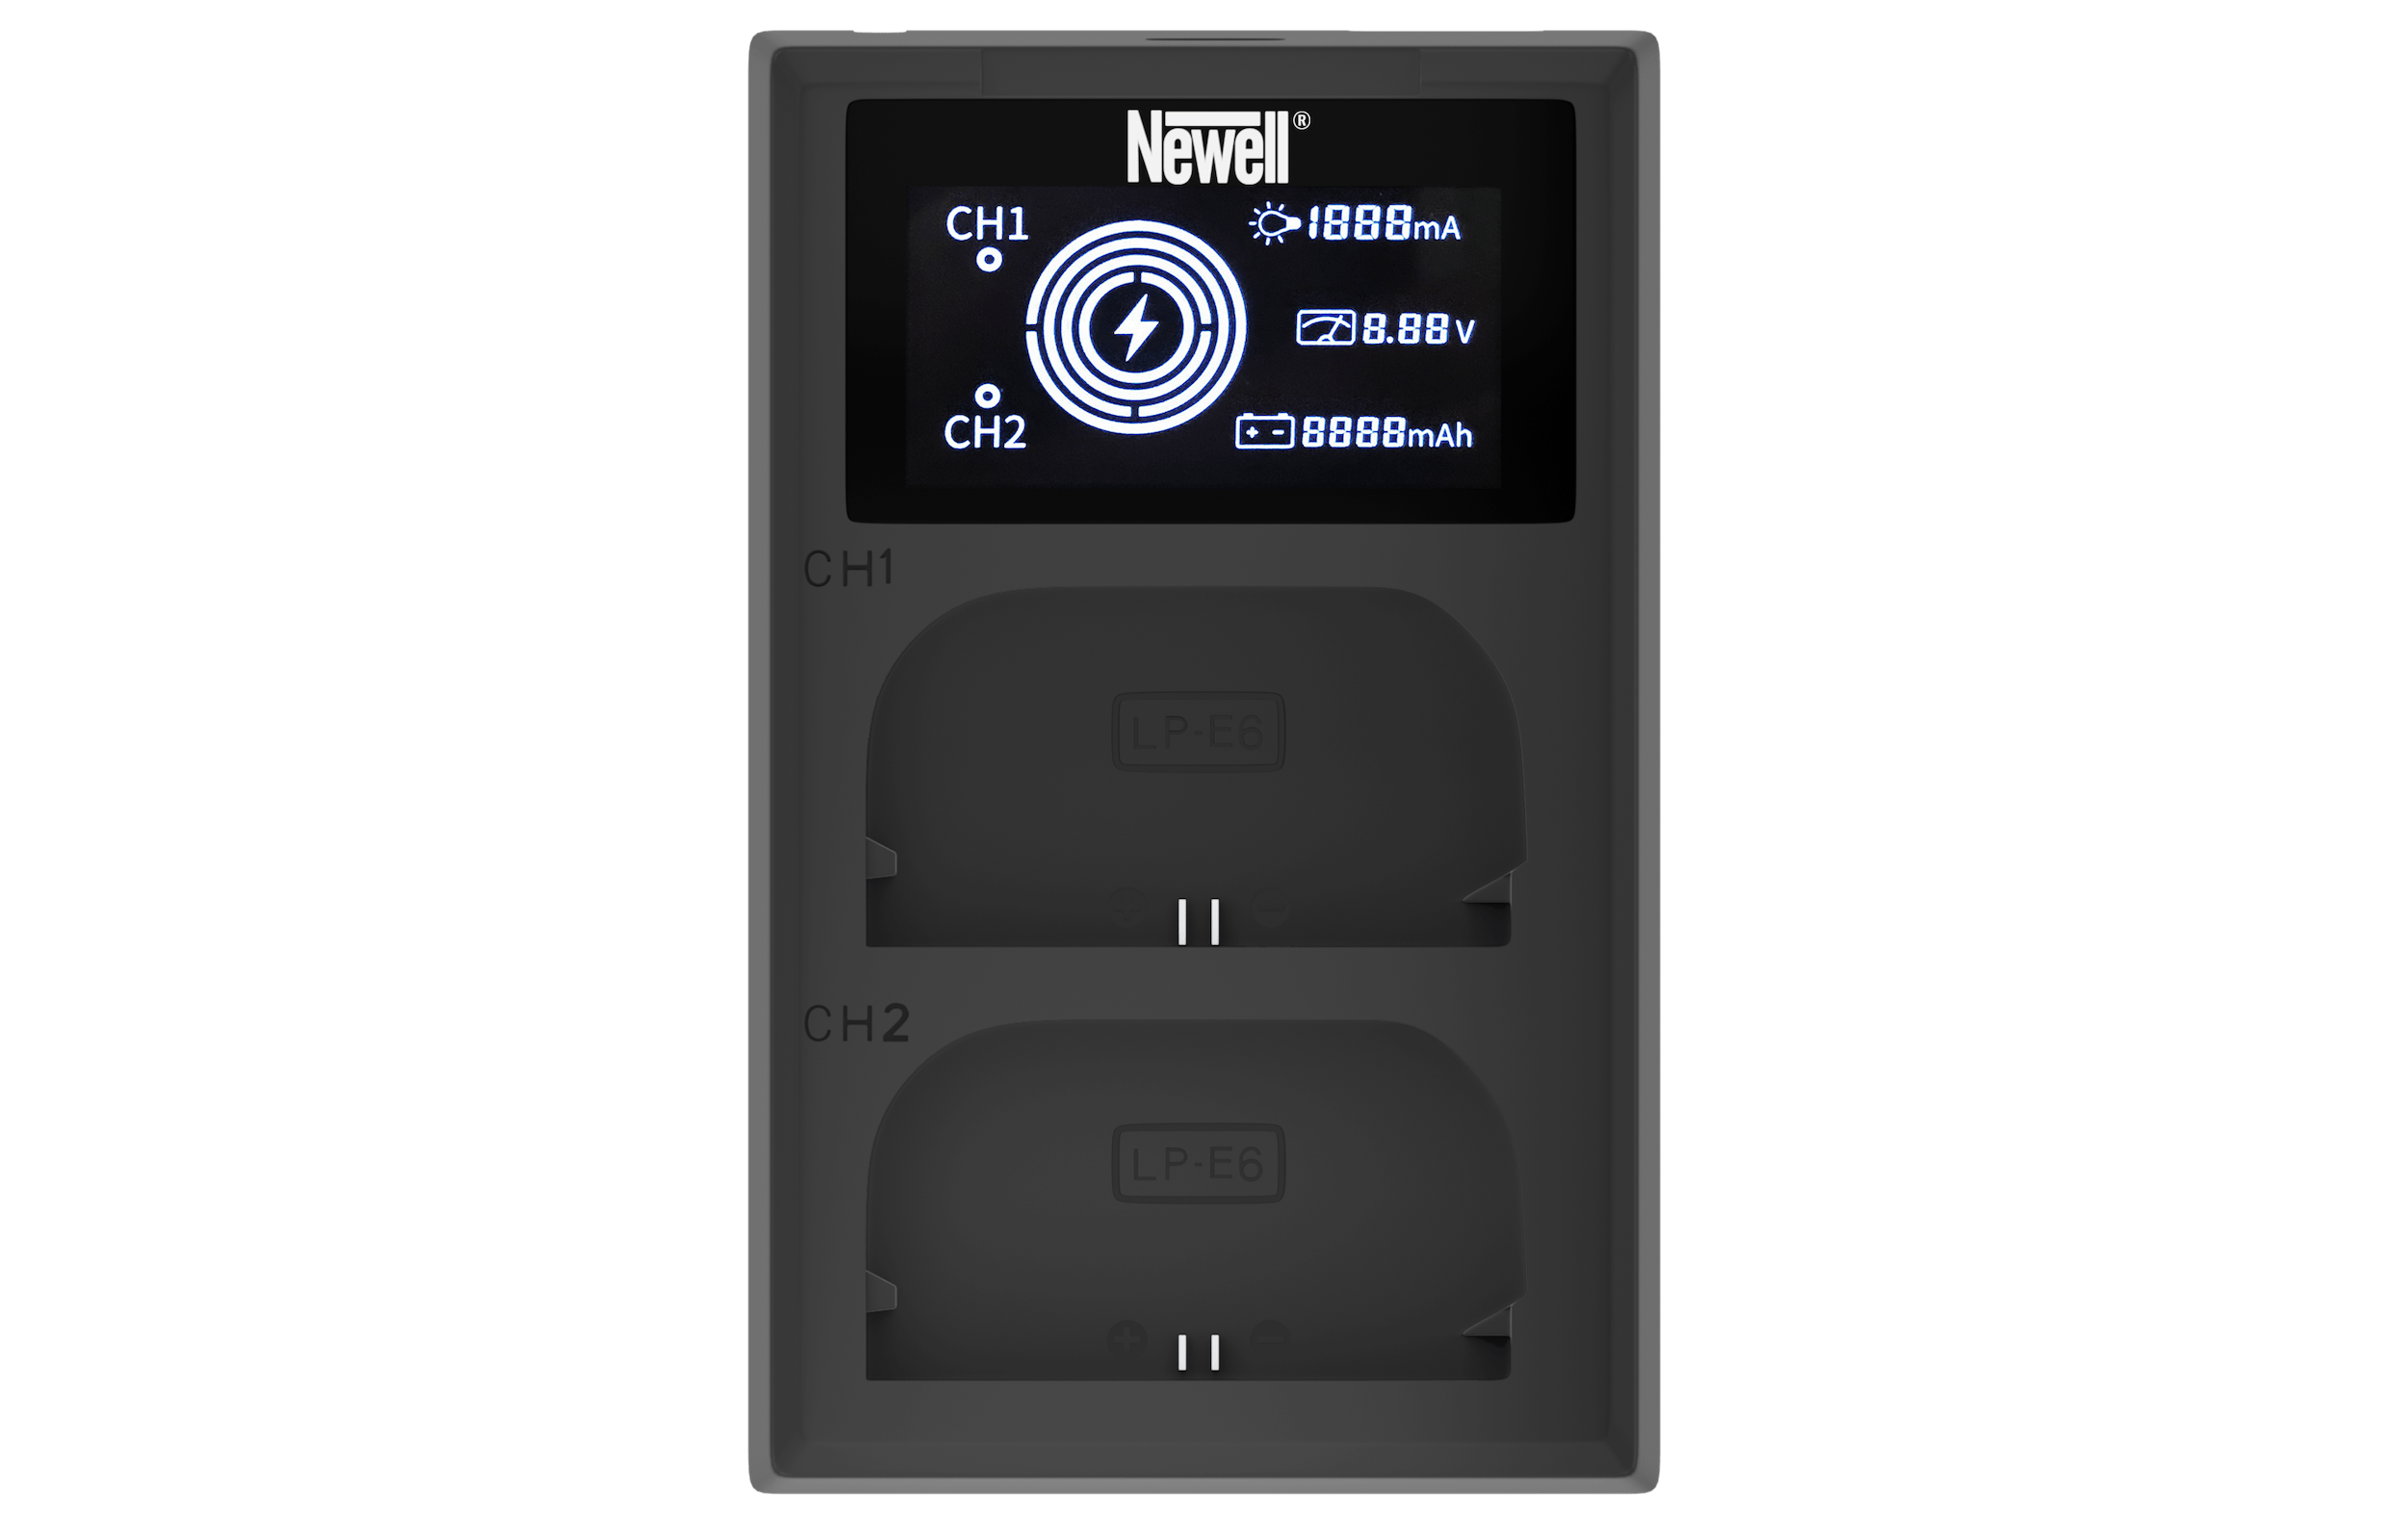 Newell FDL-USB-C dual-channel charger for LP-E6